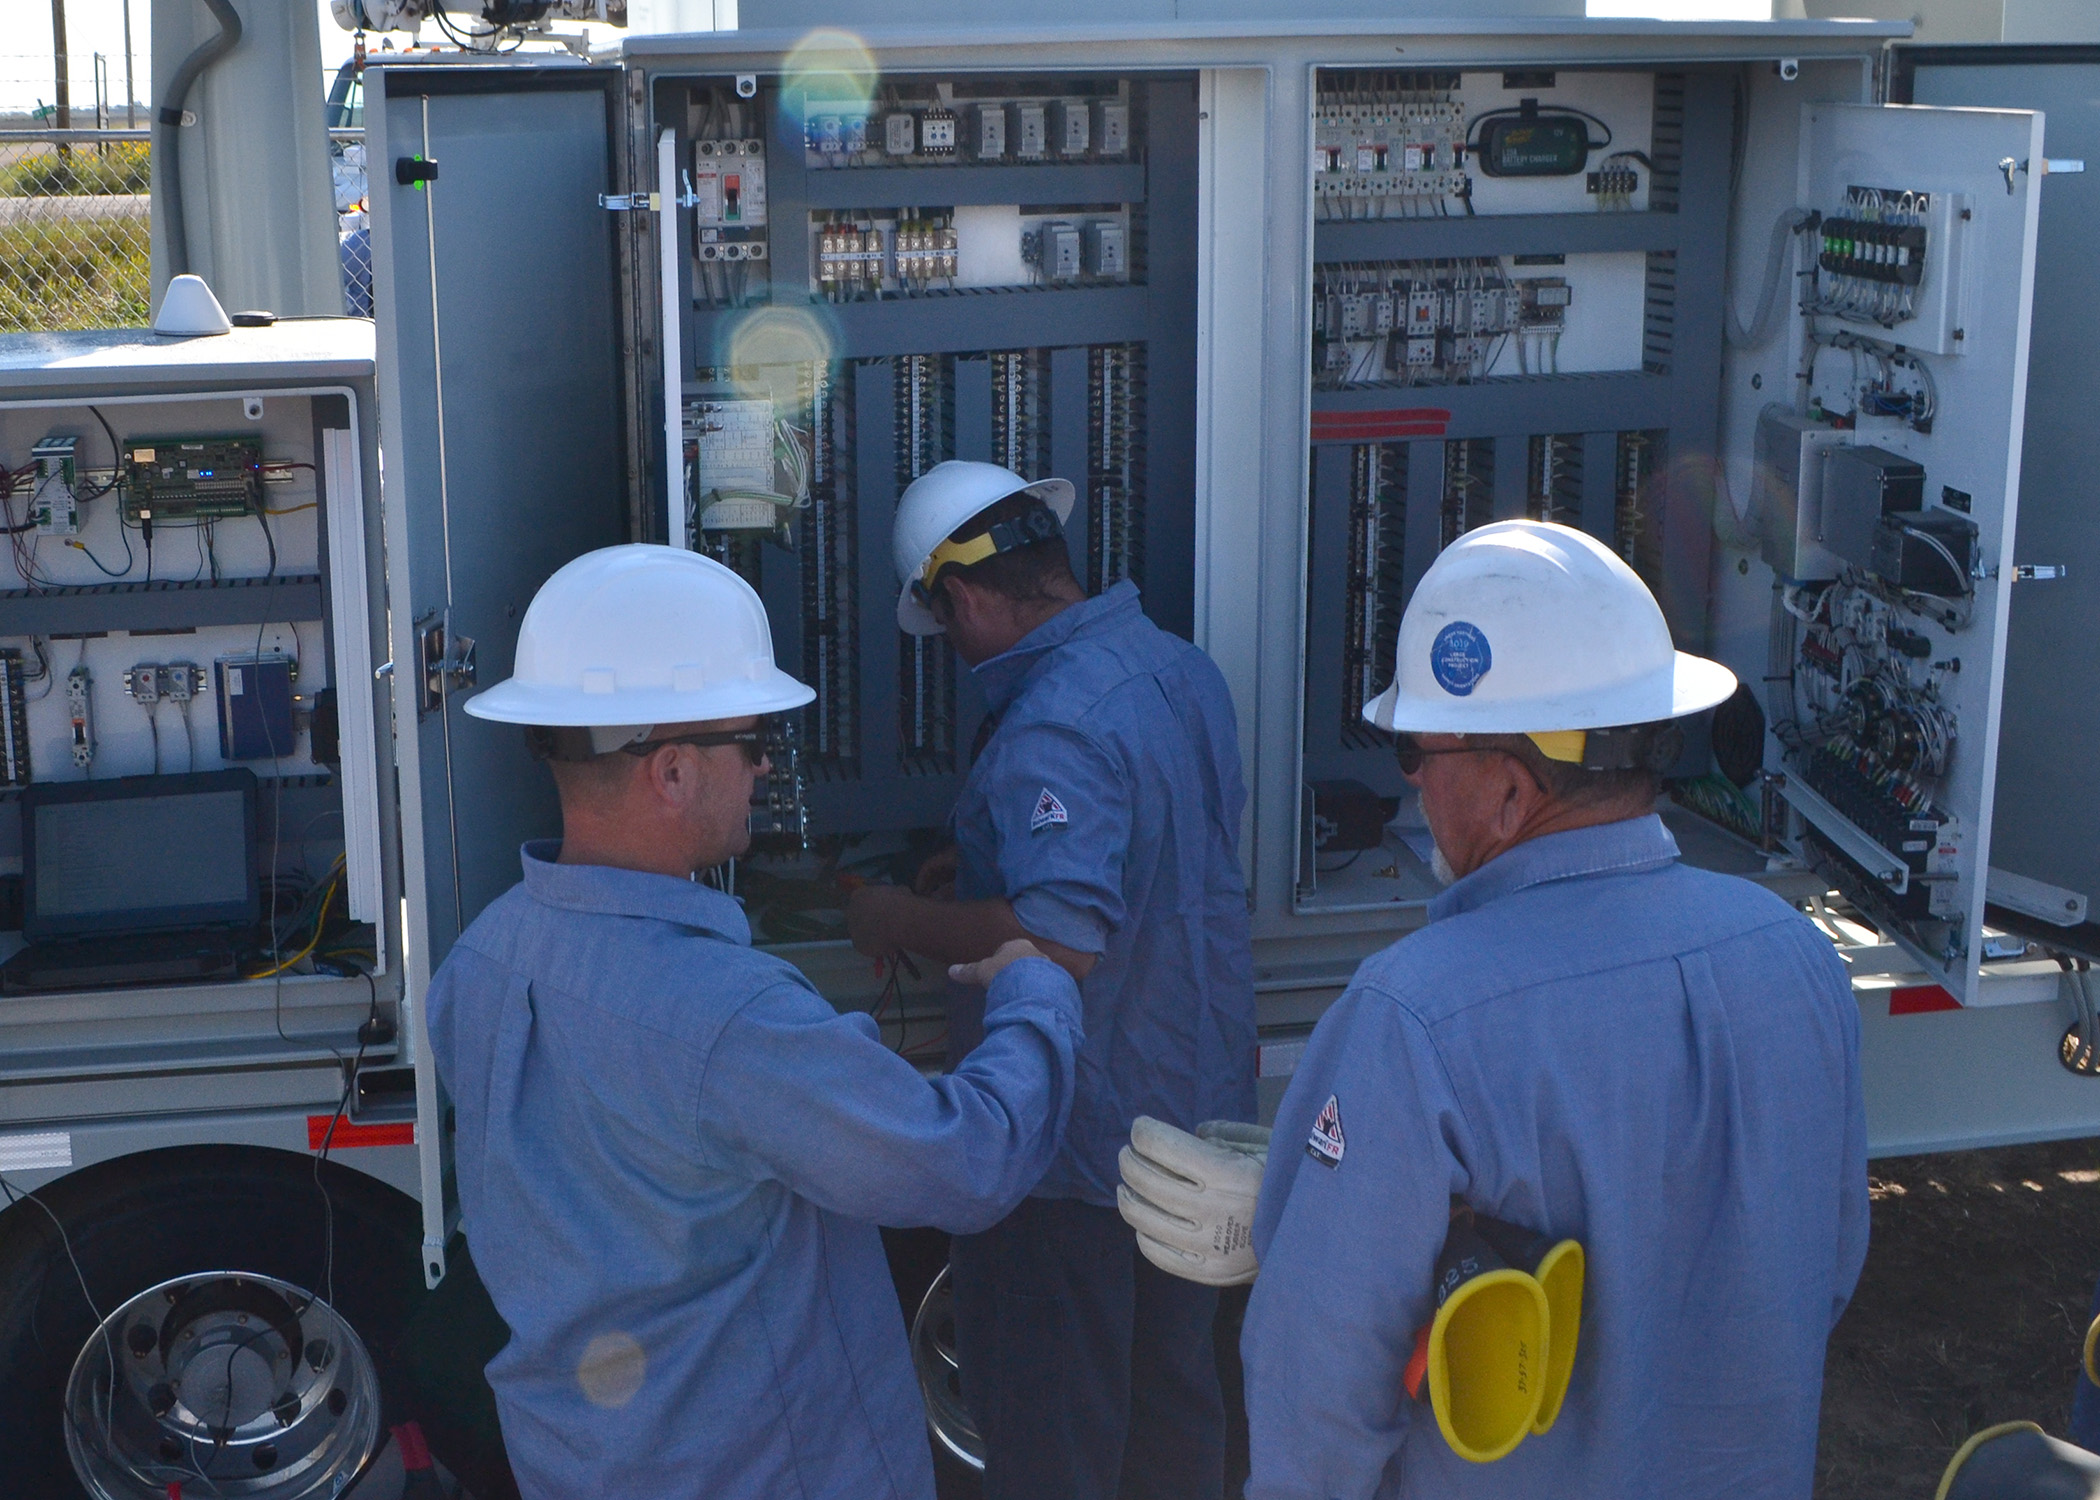 Three men in blue shirts and white hard hats talk as they look inside an electrical panel cabinet of a mobile substation.